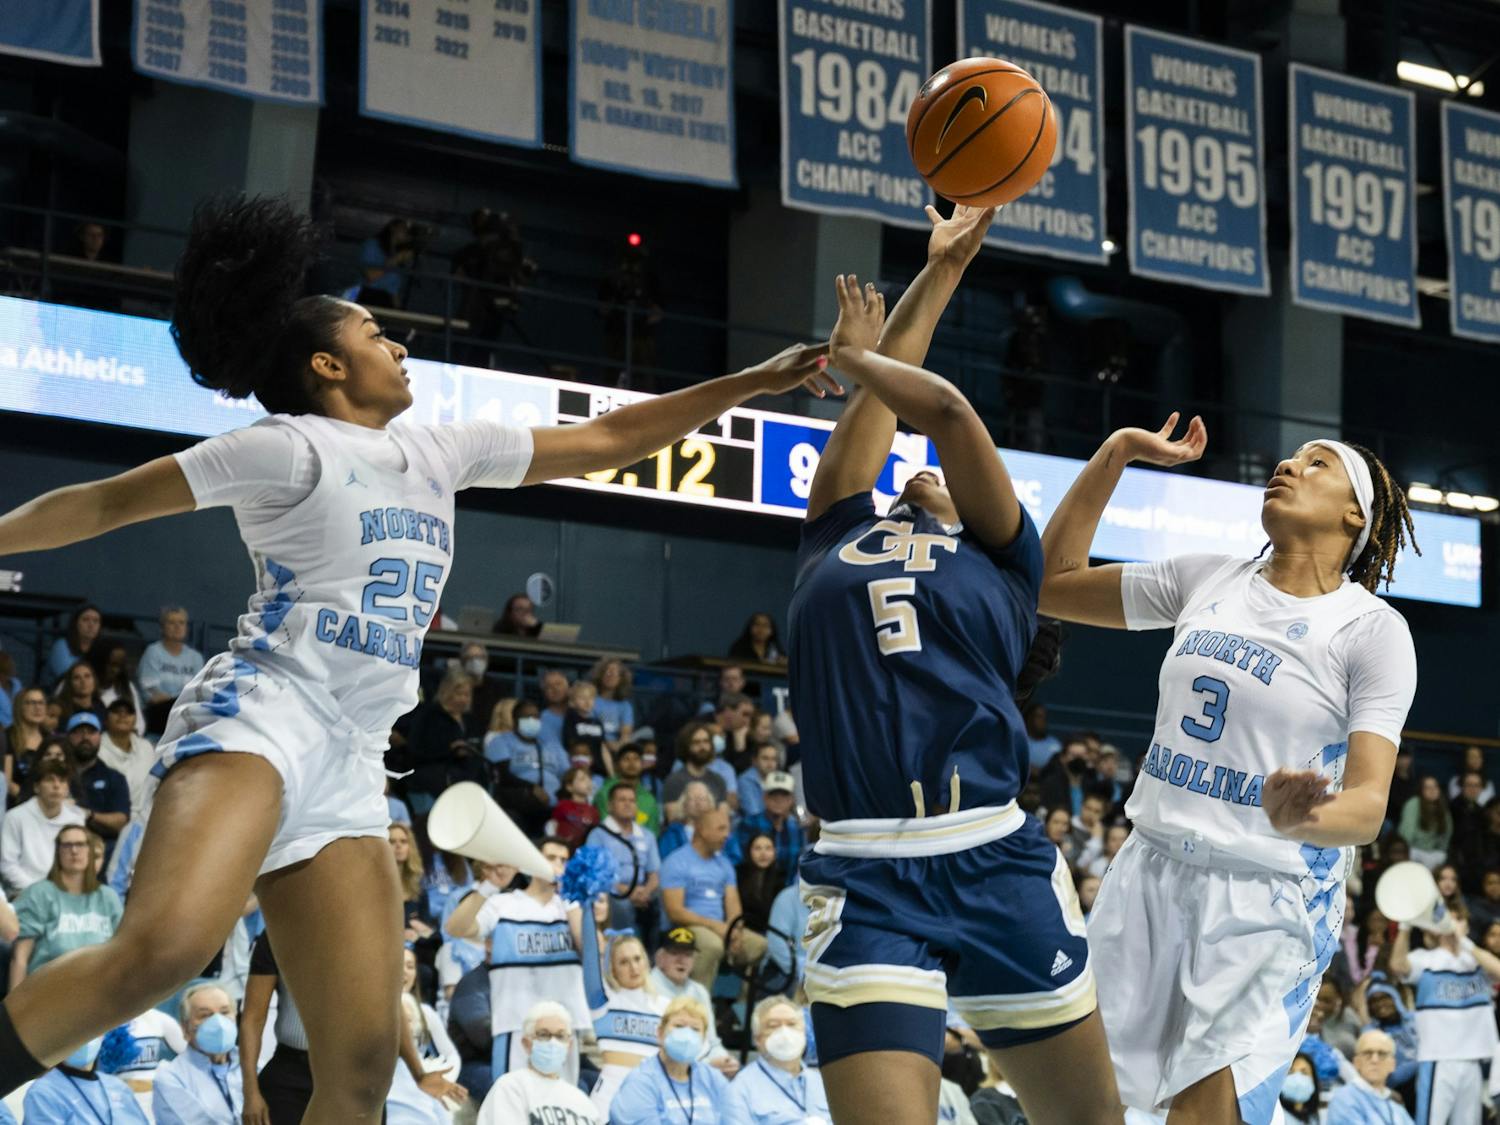 UNC junior guard Deja Kelly (25) and junior guard Kennedy Todd-Williams (3) defend the basket during a basketball game against Georgia Tech on Sunday, Jan. 22, 2023, in Carmichael Arena. UNC won 70-57.